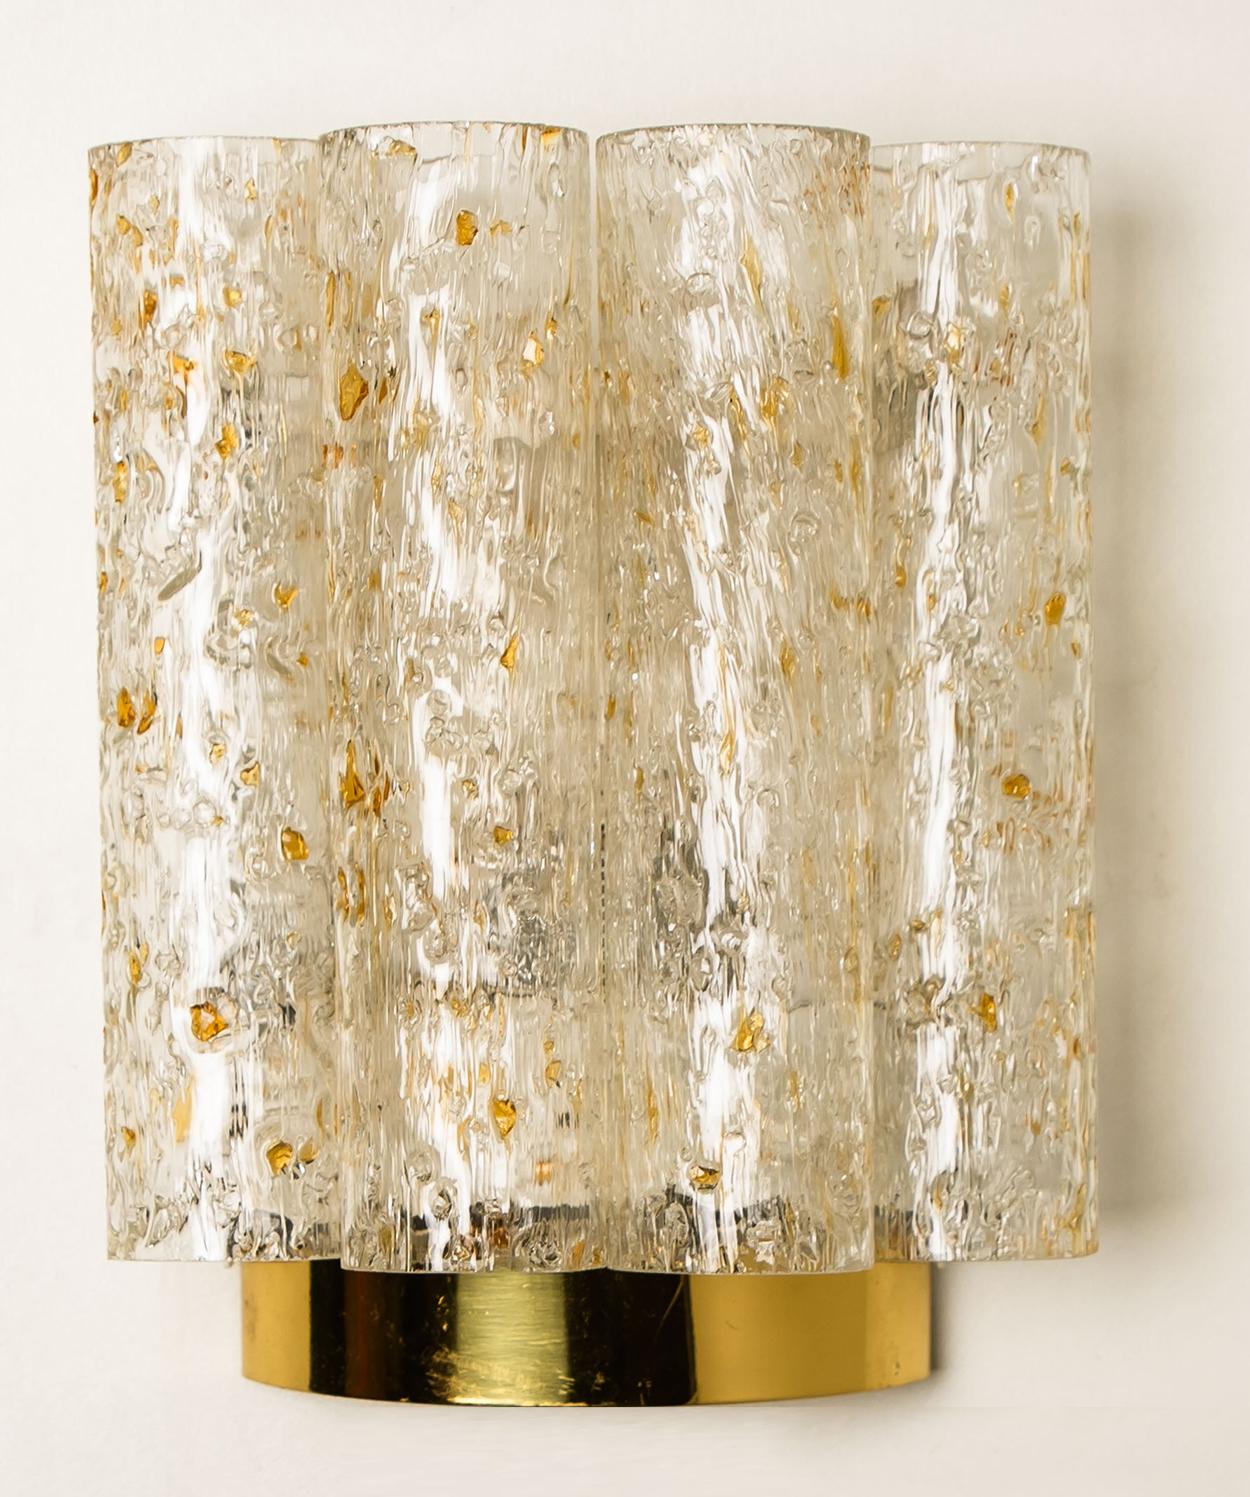 1 of the 6 Doria Wall Lamps in Brass and Glass, 1960s For Sale 8